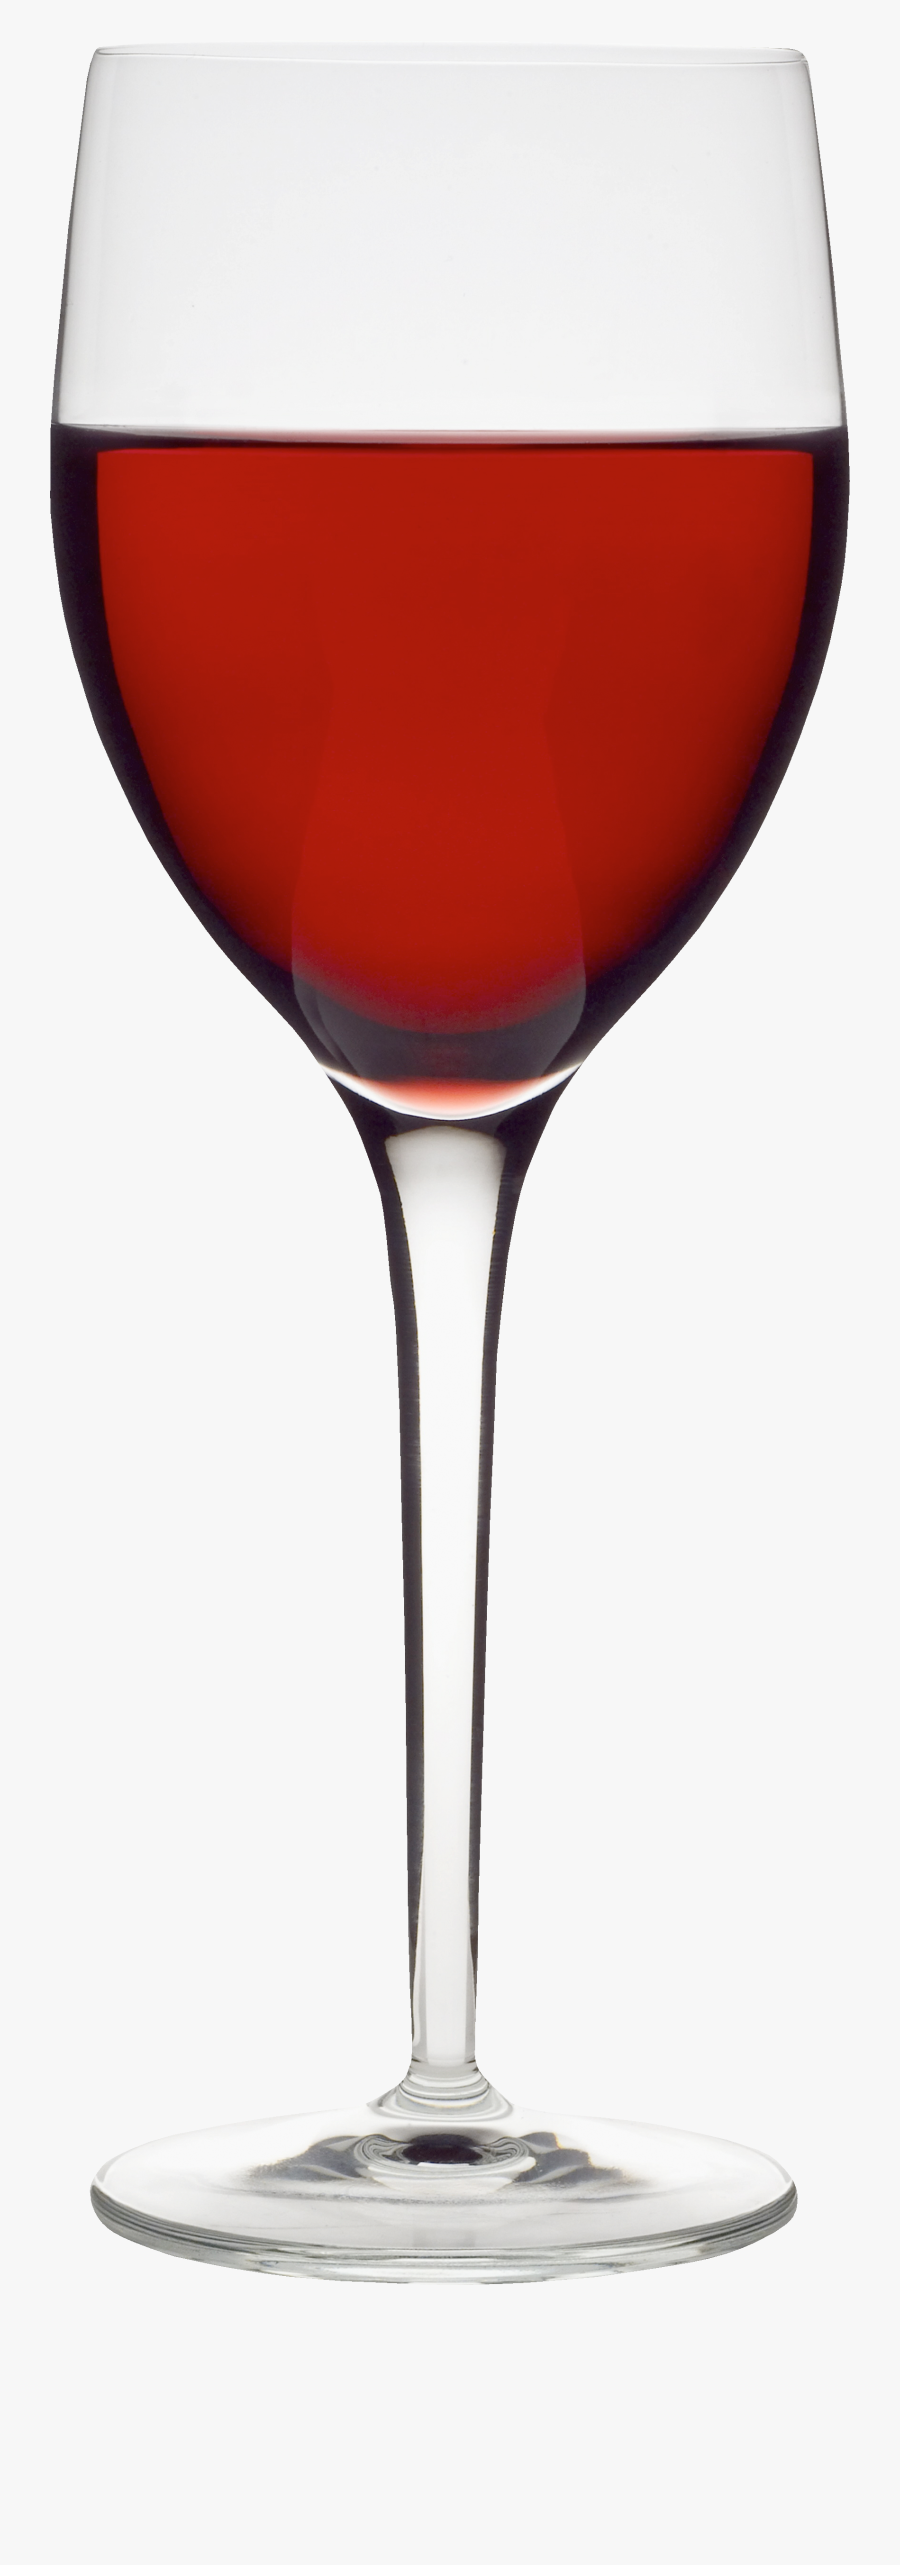 Glass Of Red Wine Png - Wine Glass, Transparent Clipart